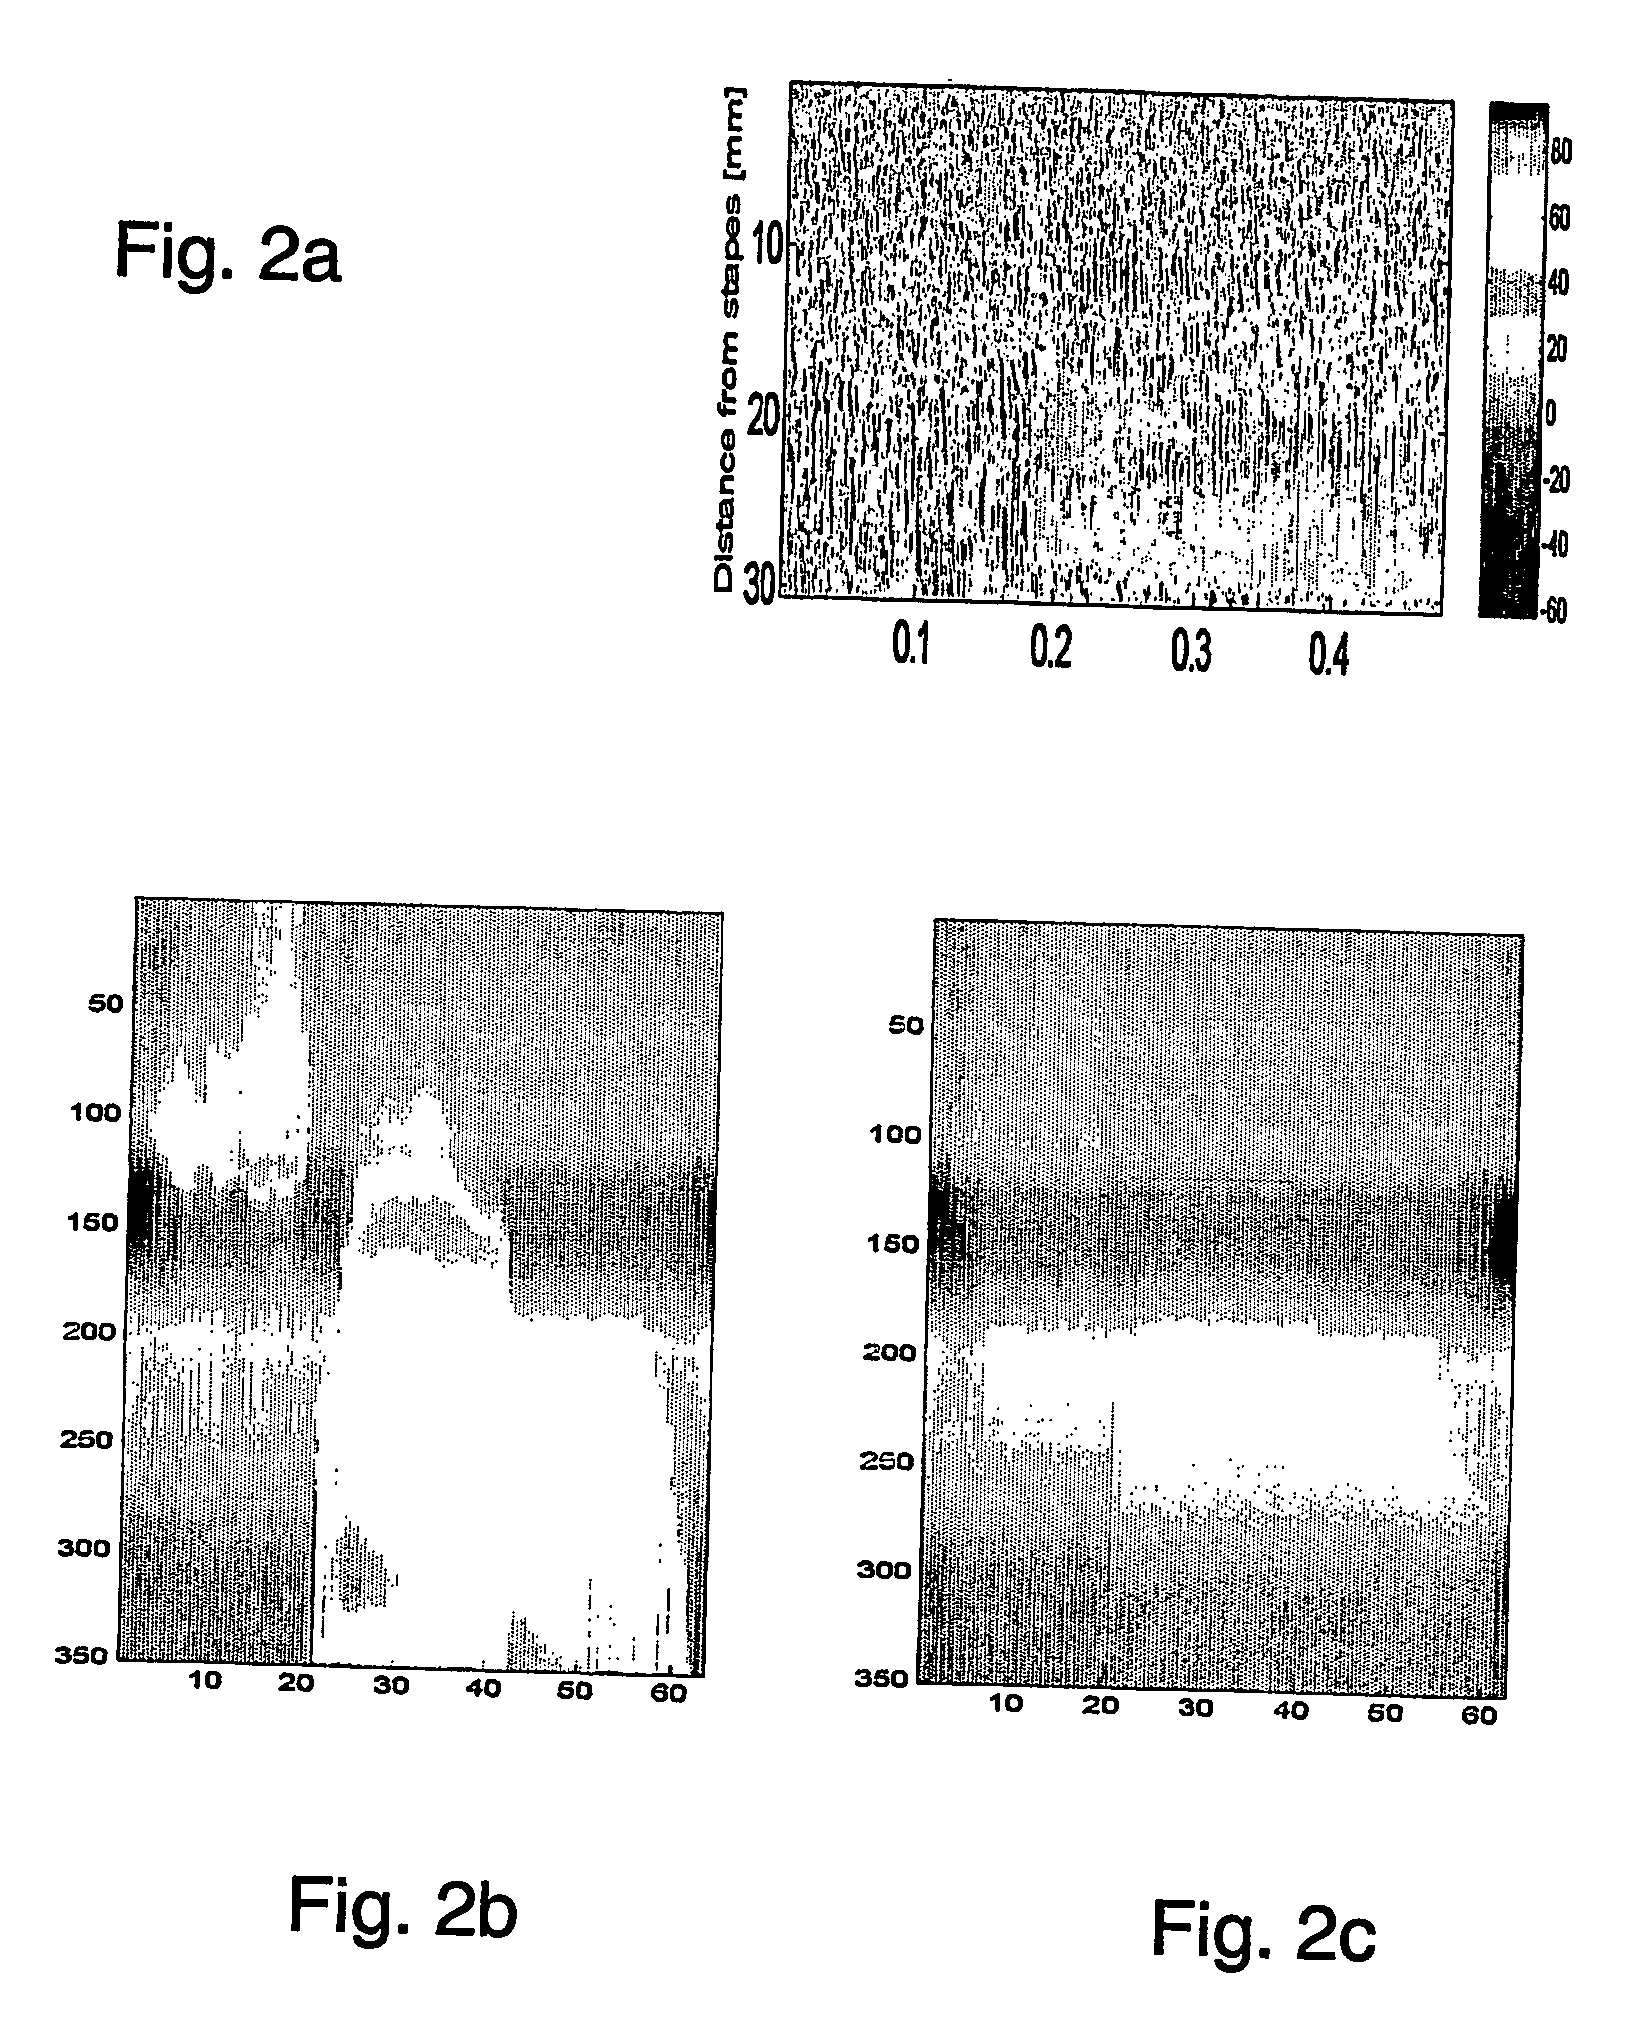 Method apparatus and system for processing acoustic signals